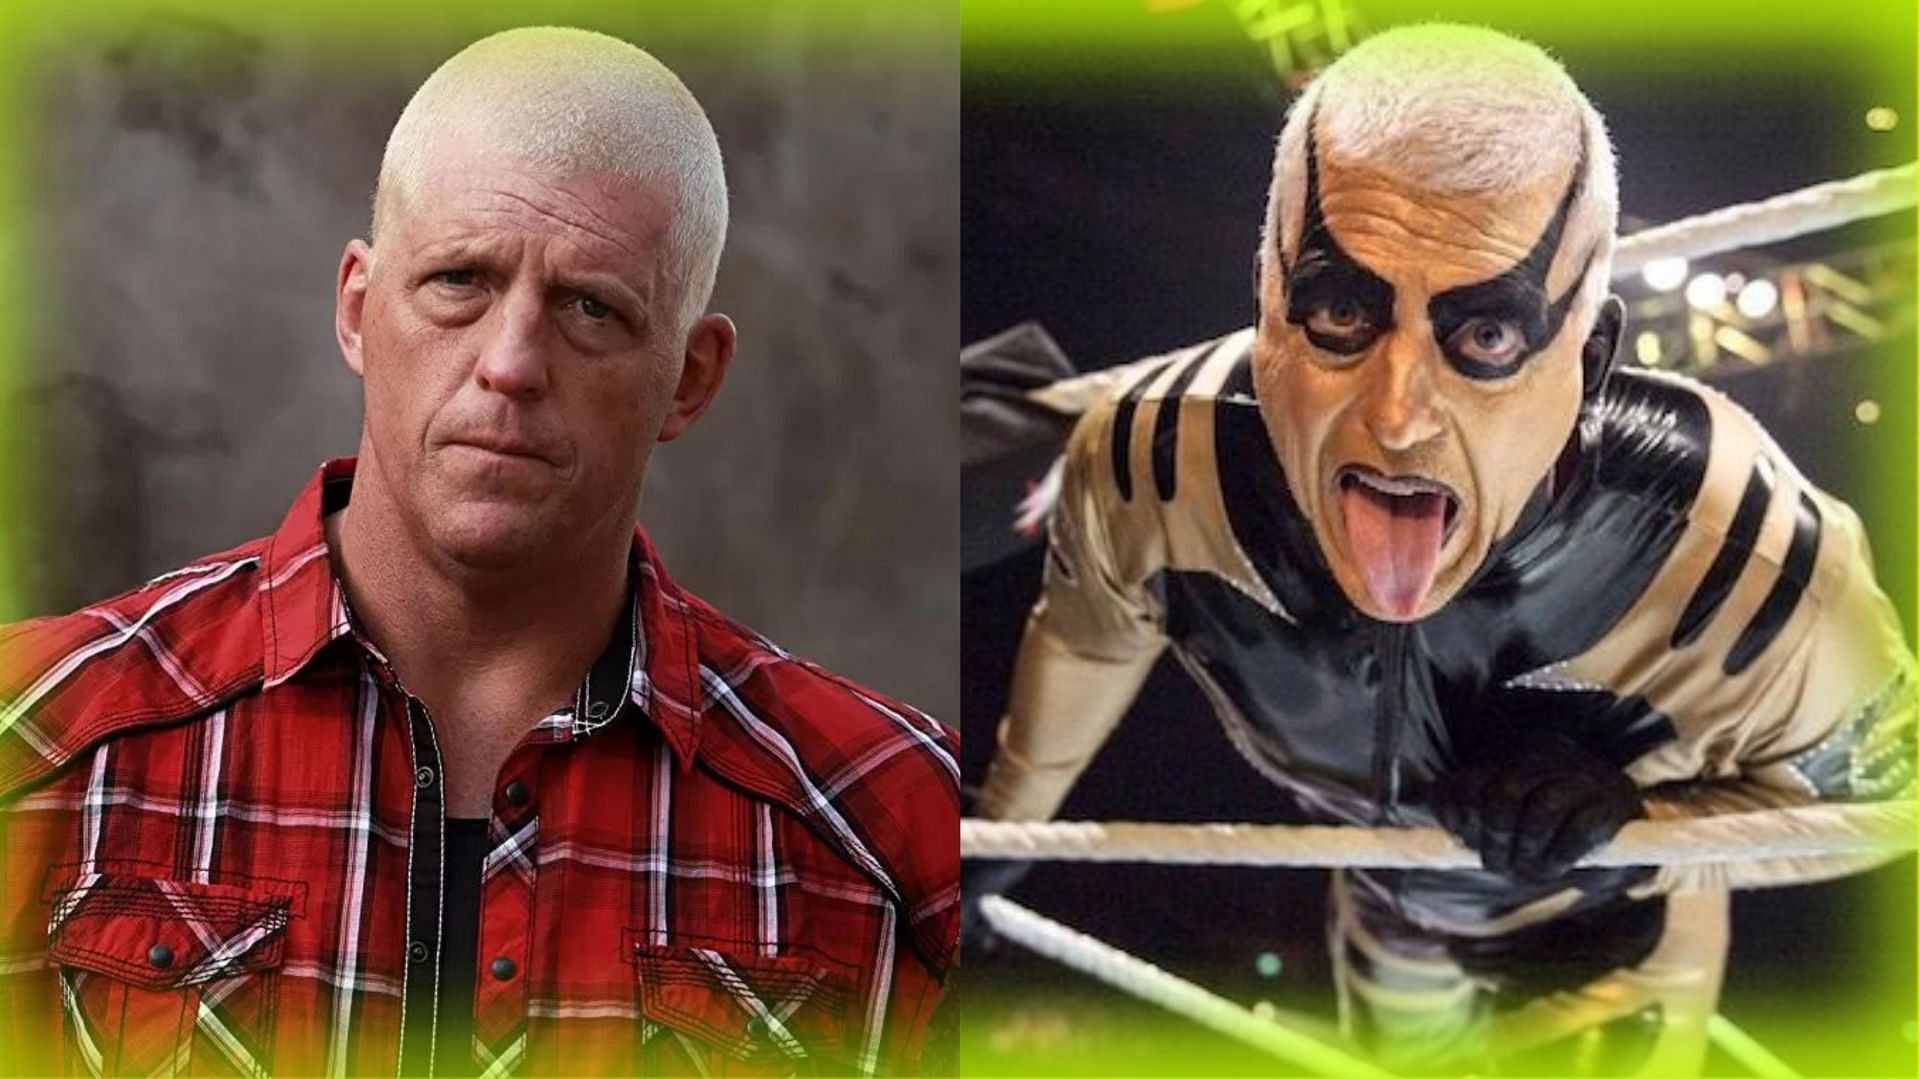 Goldust is a multi-time champion in WWE